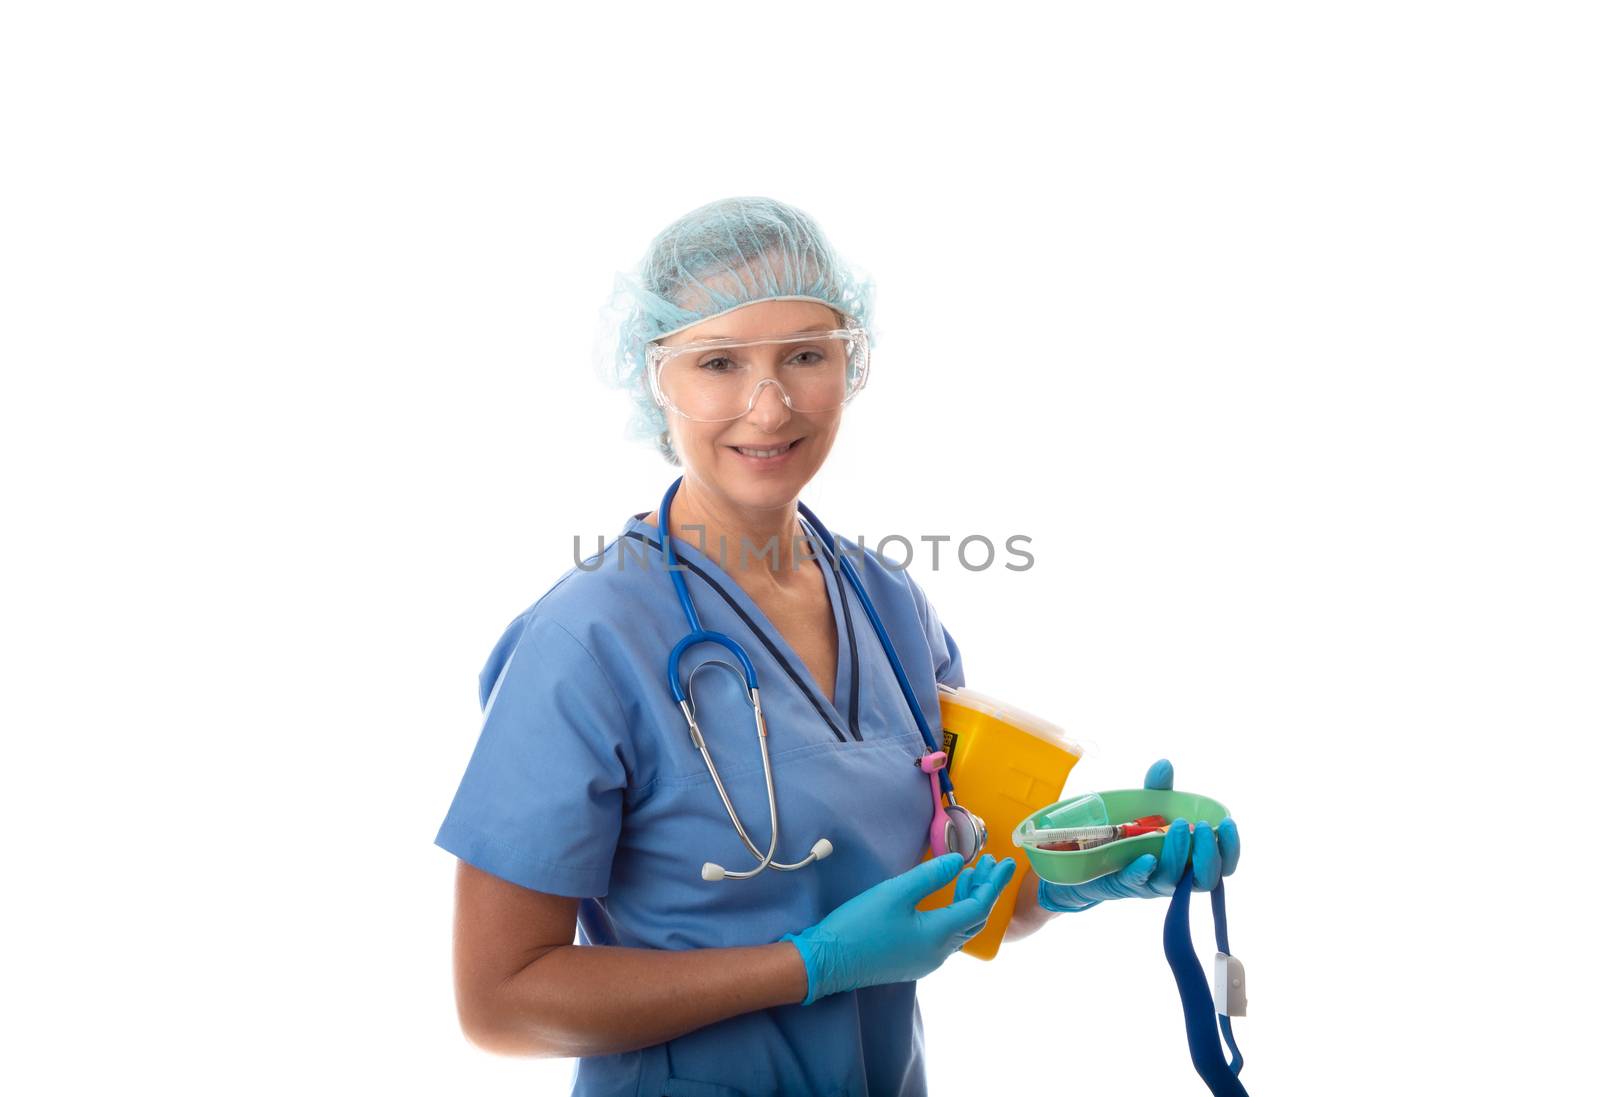 A nurse or pathologist holding blood tubes in a kidney dish, with tourniquet and sharps container